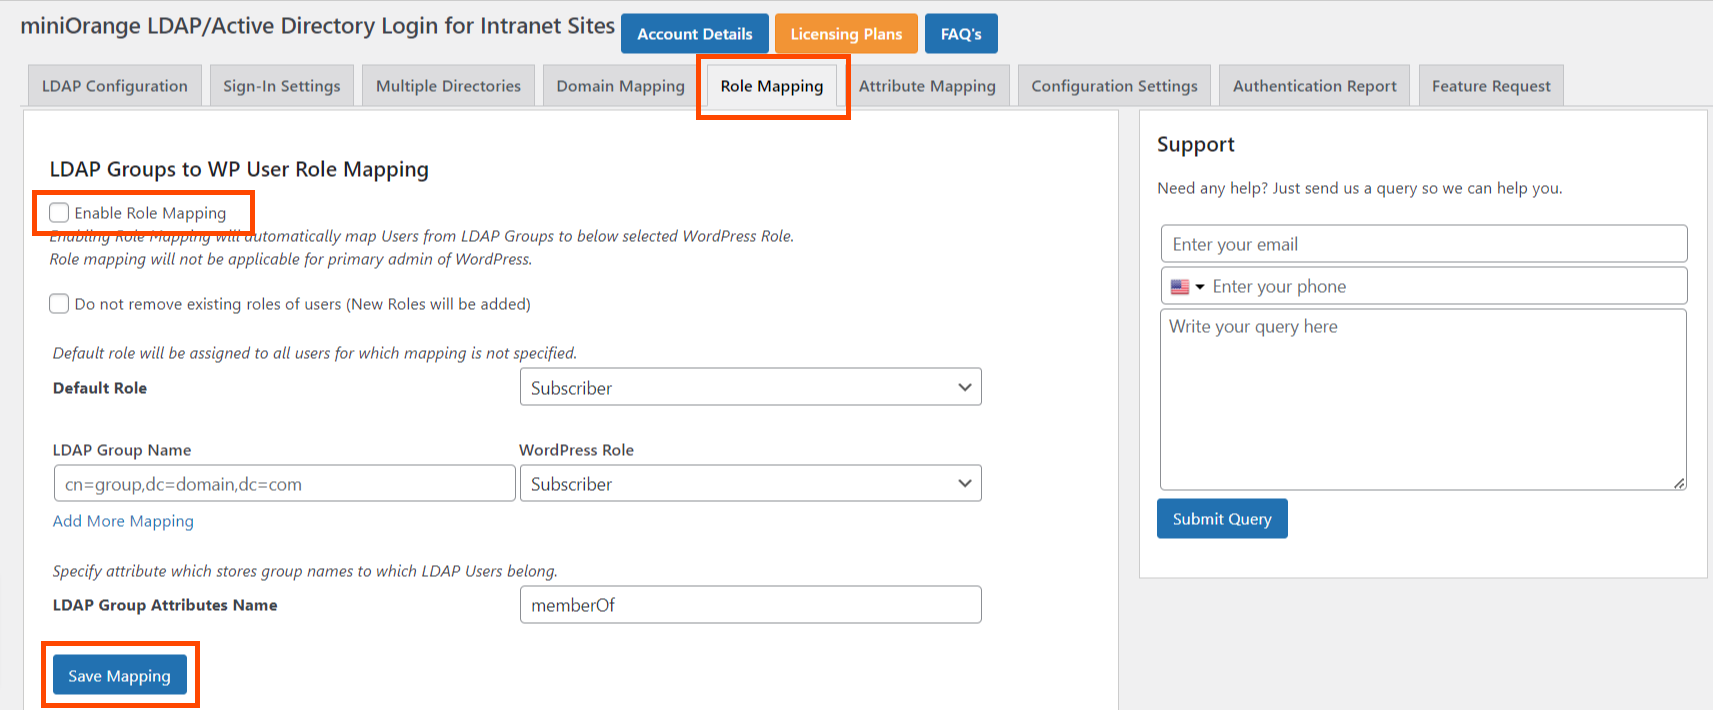 LDAP AD Login for Intranet sites Add Multiple Directory LDAP Groups to WordPress Role Mapping